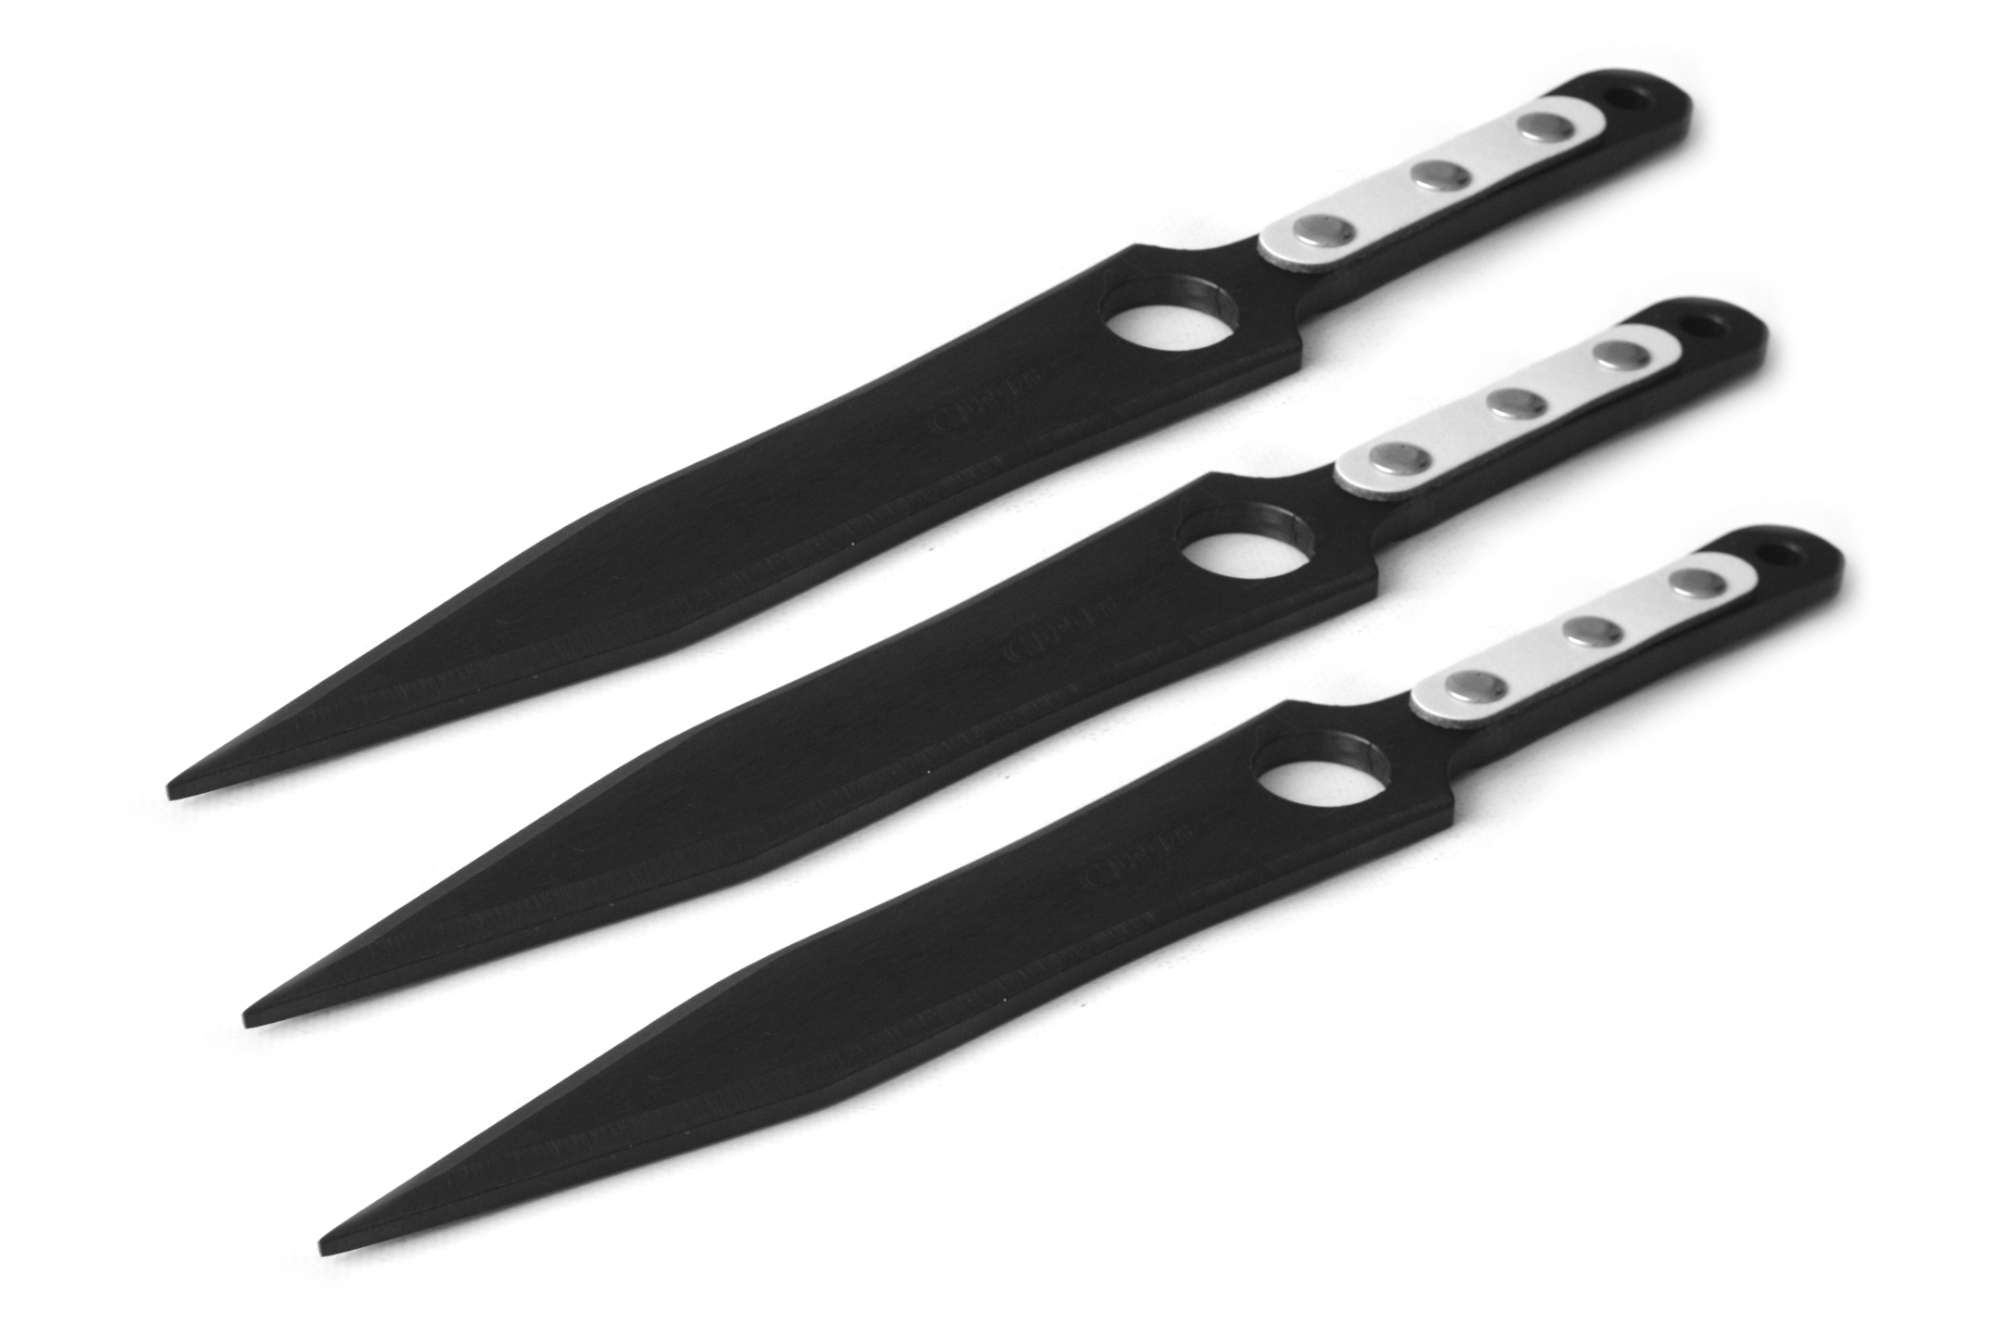 ACEJET MAXIMUS SHADOW 12" white grip - Spinner Throwing knife - set of 3